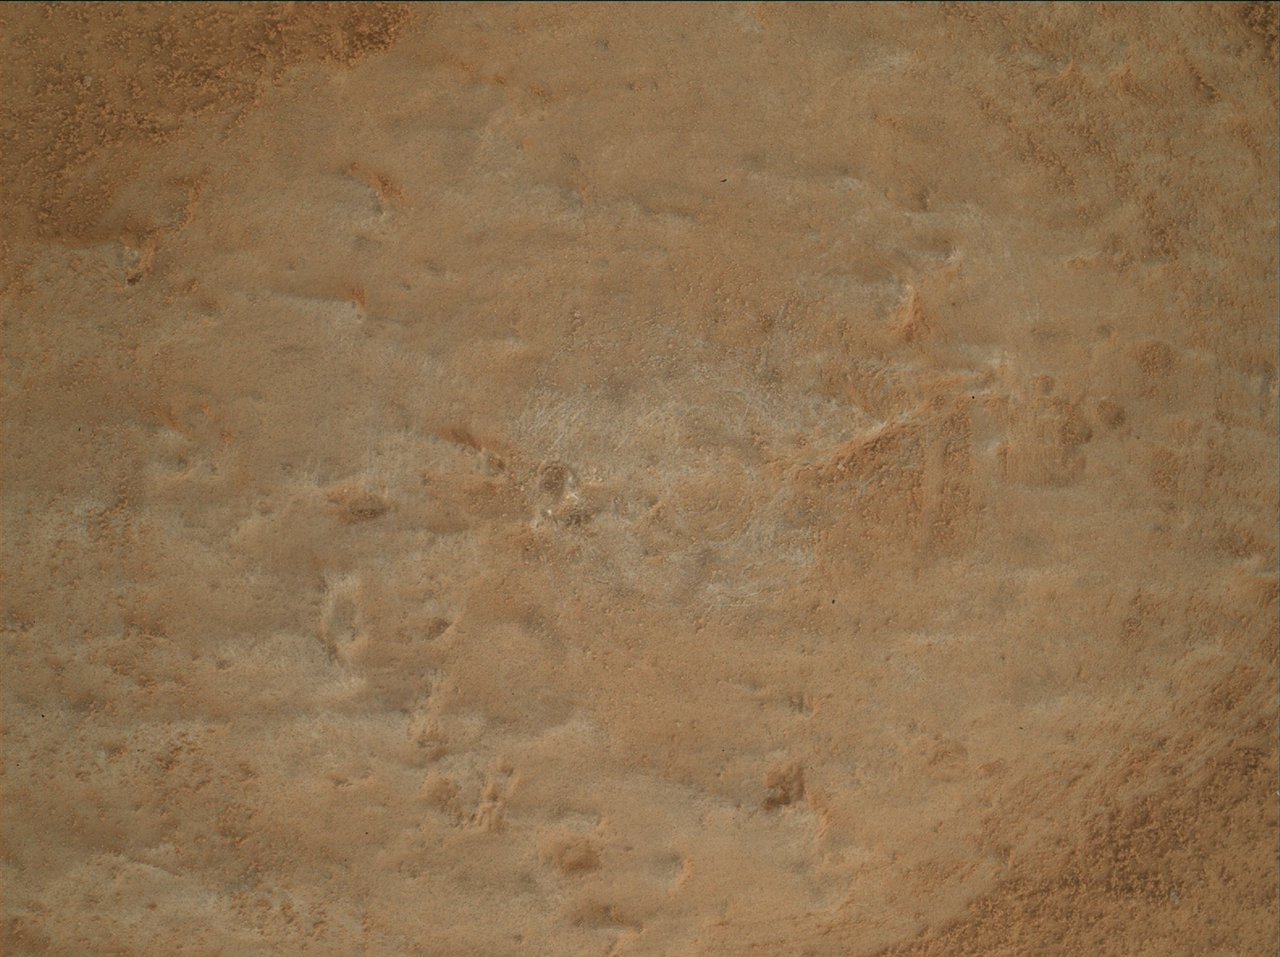 MAHLI close up of the Hutton drill target.